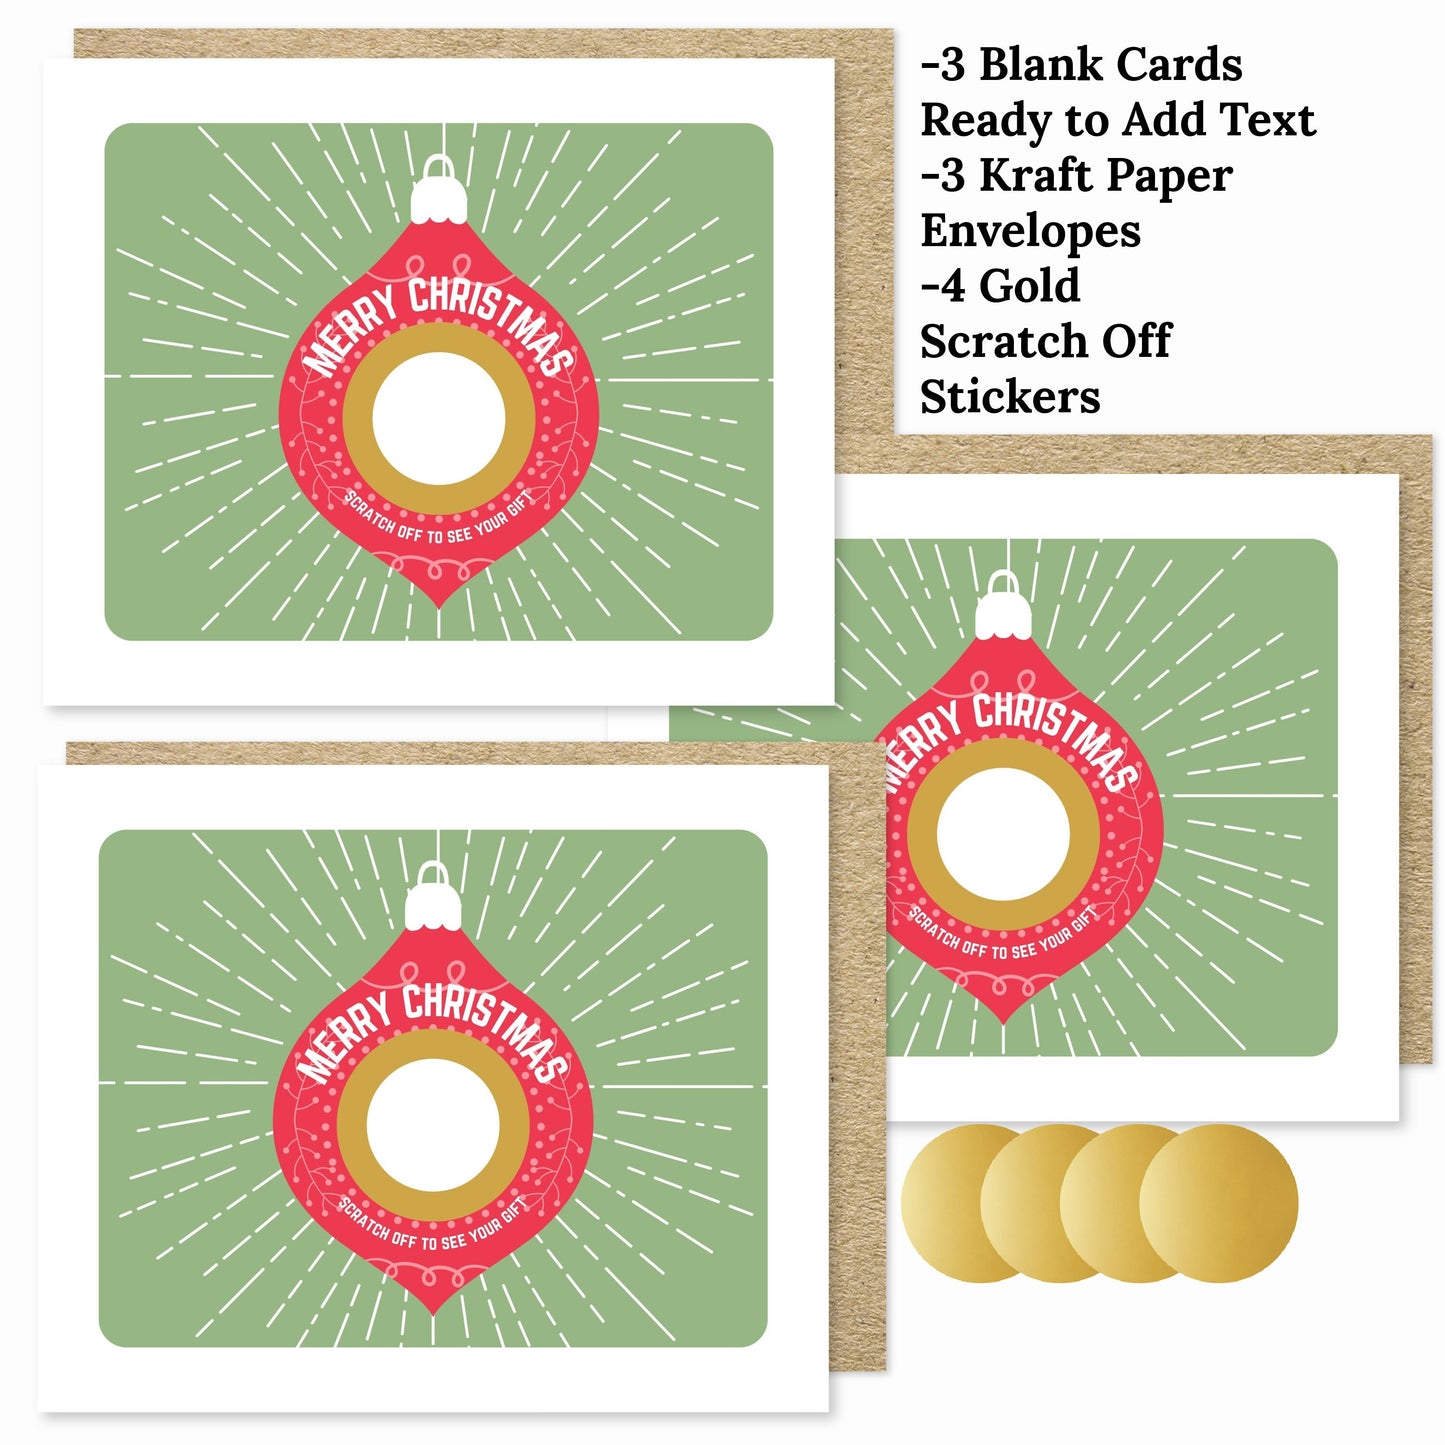 3 PK DIY Text Scratch Off Christmas Holiday Gift Ornament Card | Personalized Gift Tag Surprise Budget Last Minute Gift